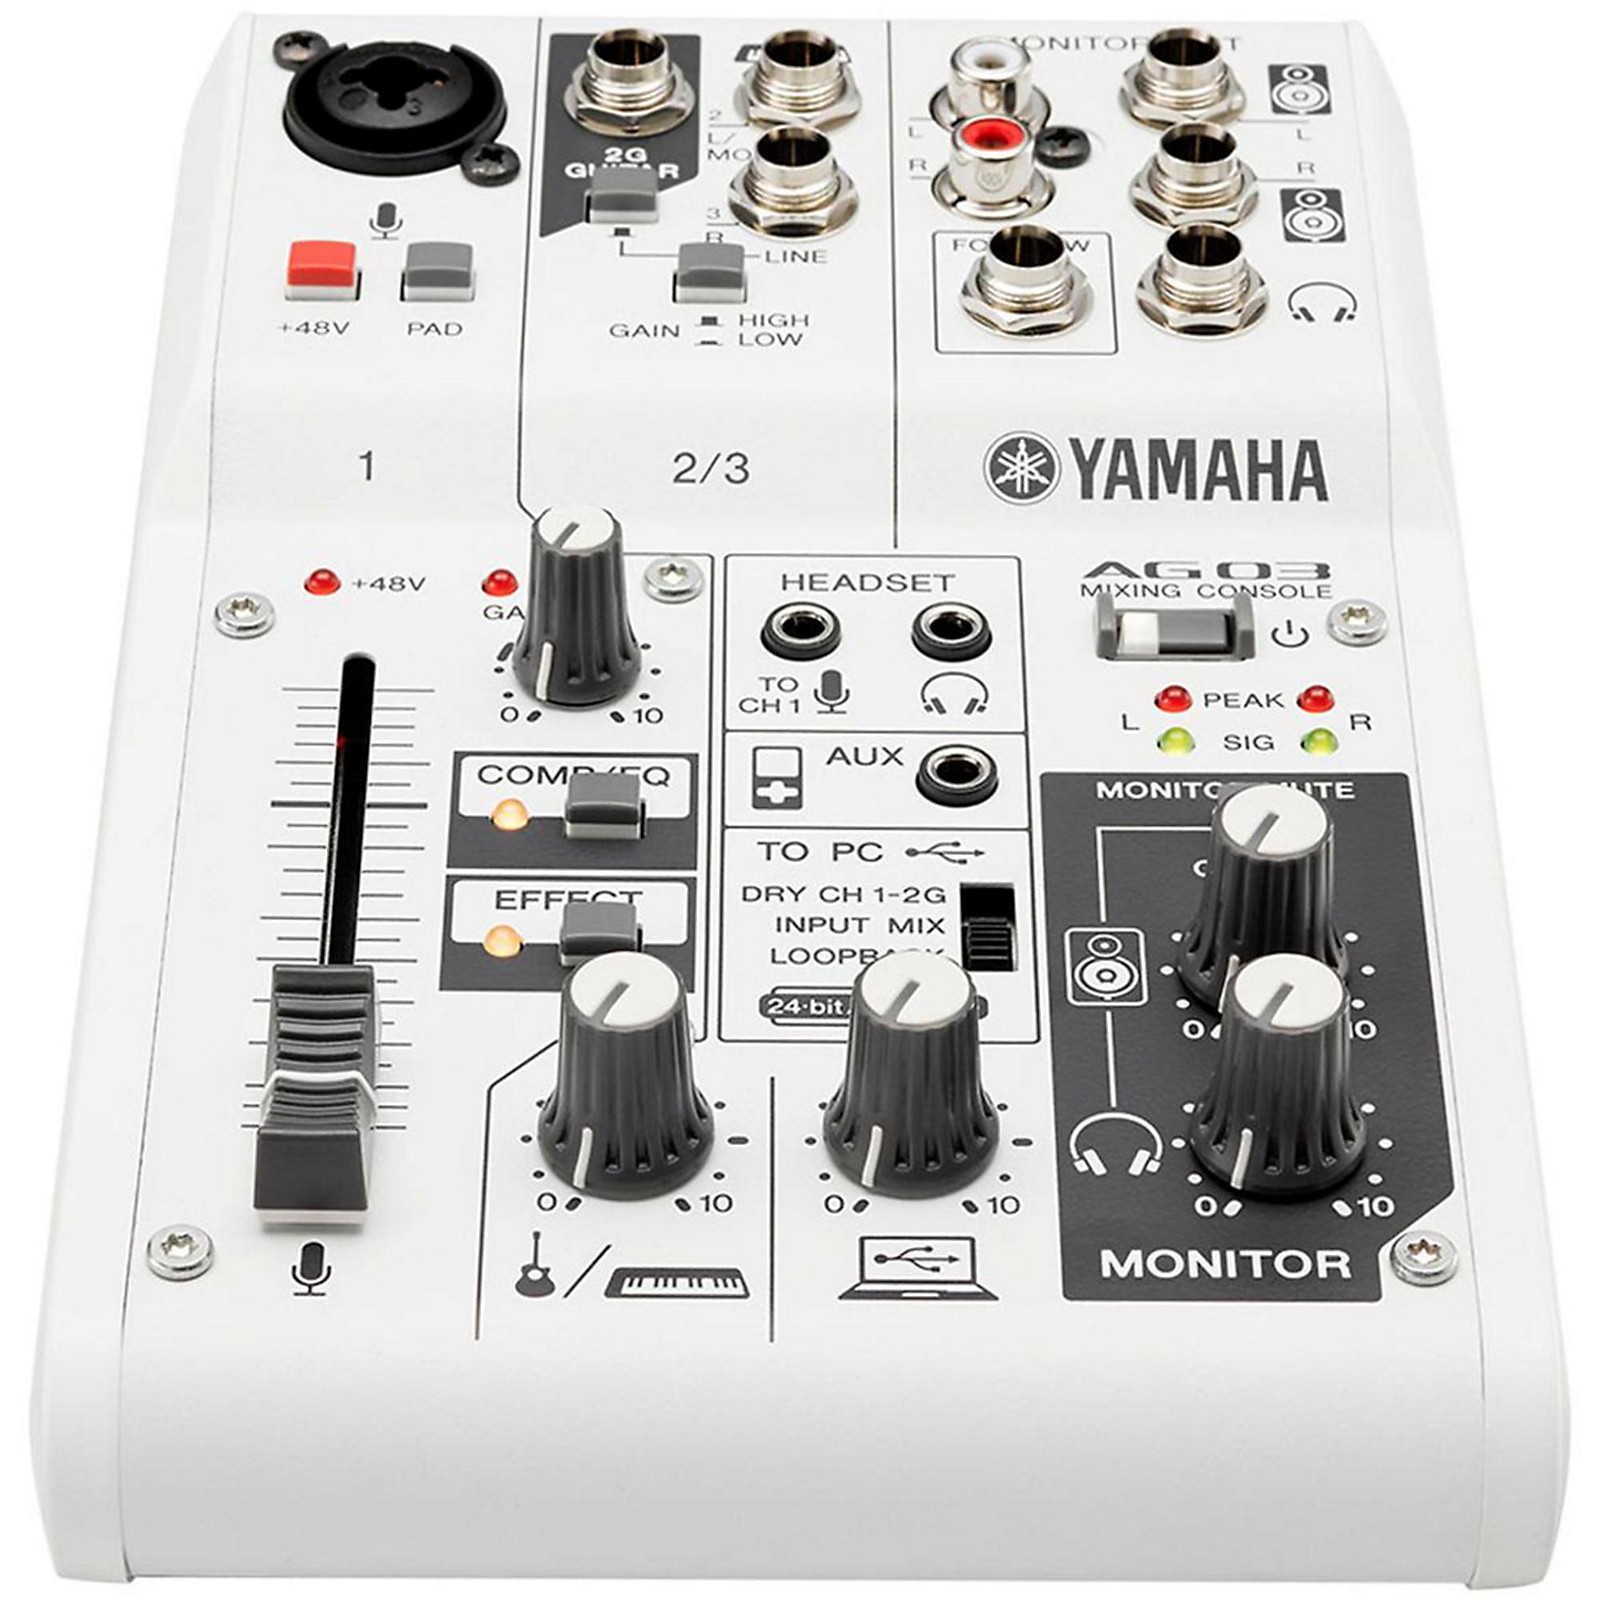 PC/タブレット PCパーツ Yamaha AG03 3-Channel Mixer/USB Interface For IOS/MAC/PC